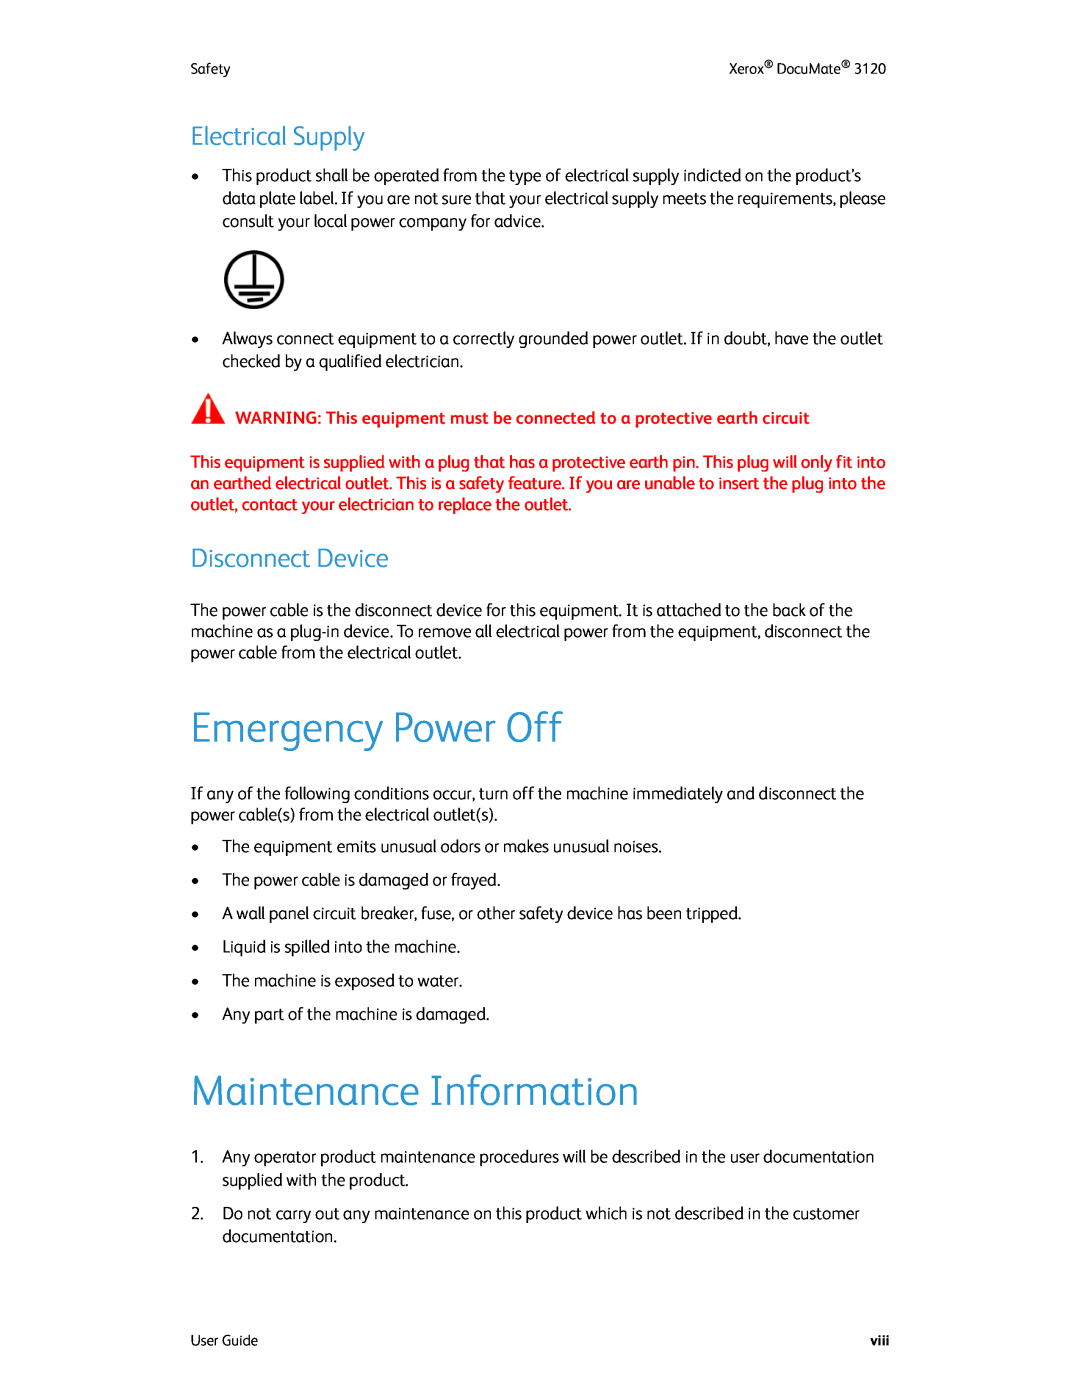 Xerox xerox manual Emergency Power Off, Maintenance Information, Electrical Supply, Disconnect Device 